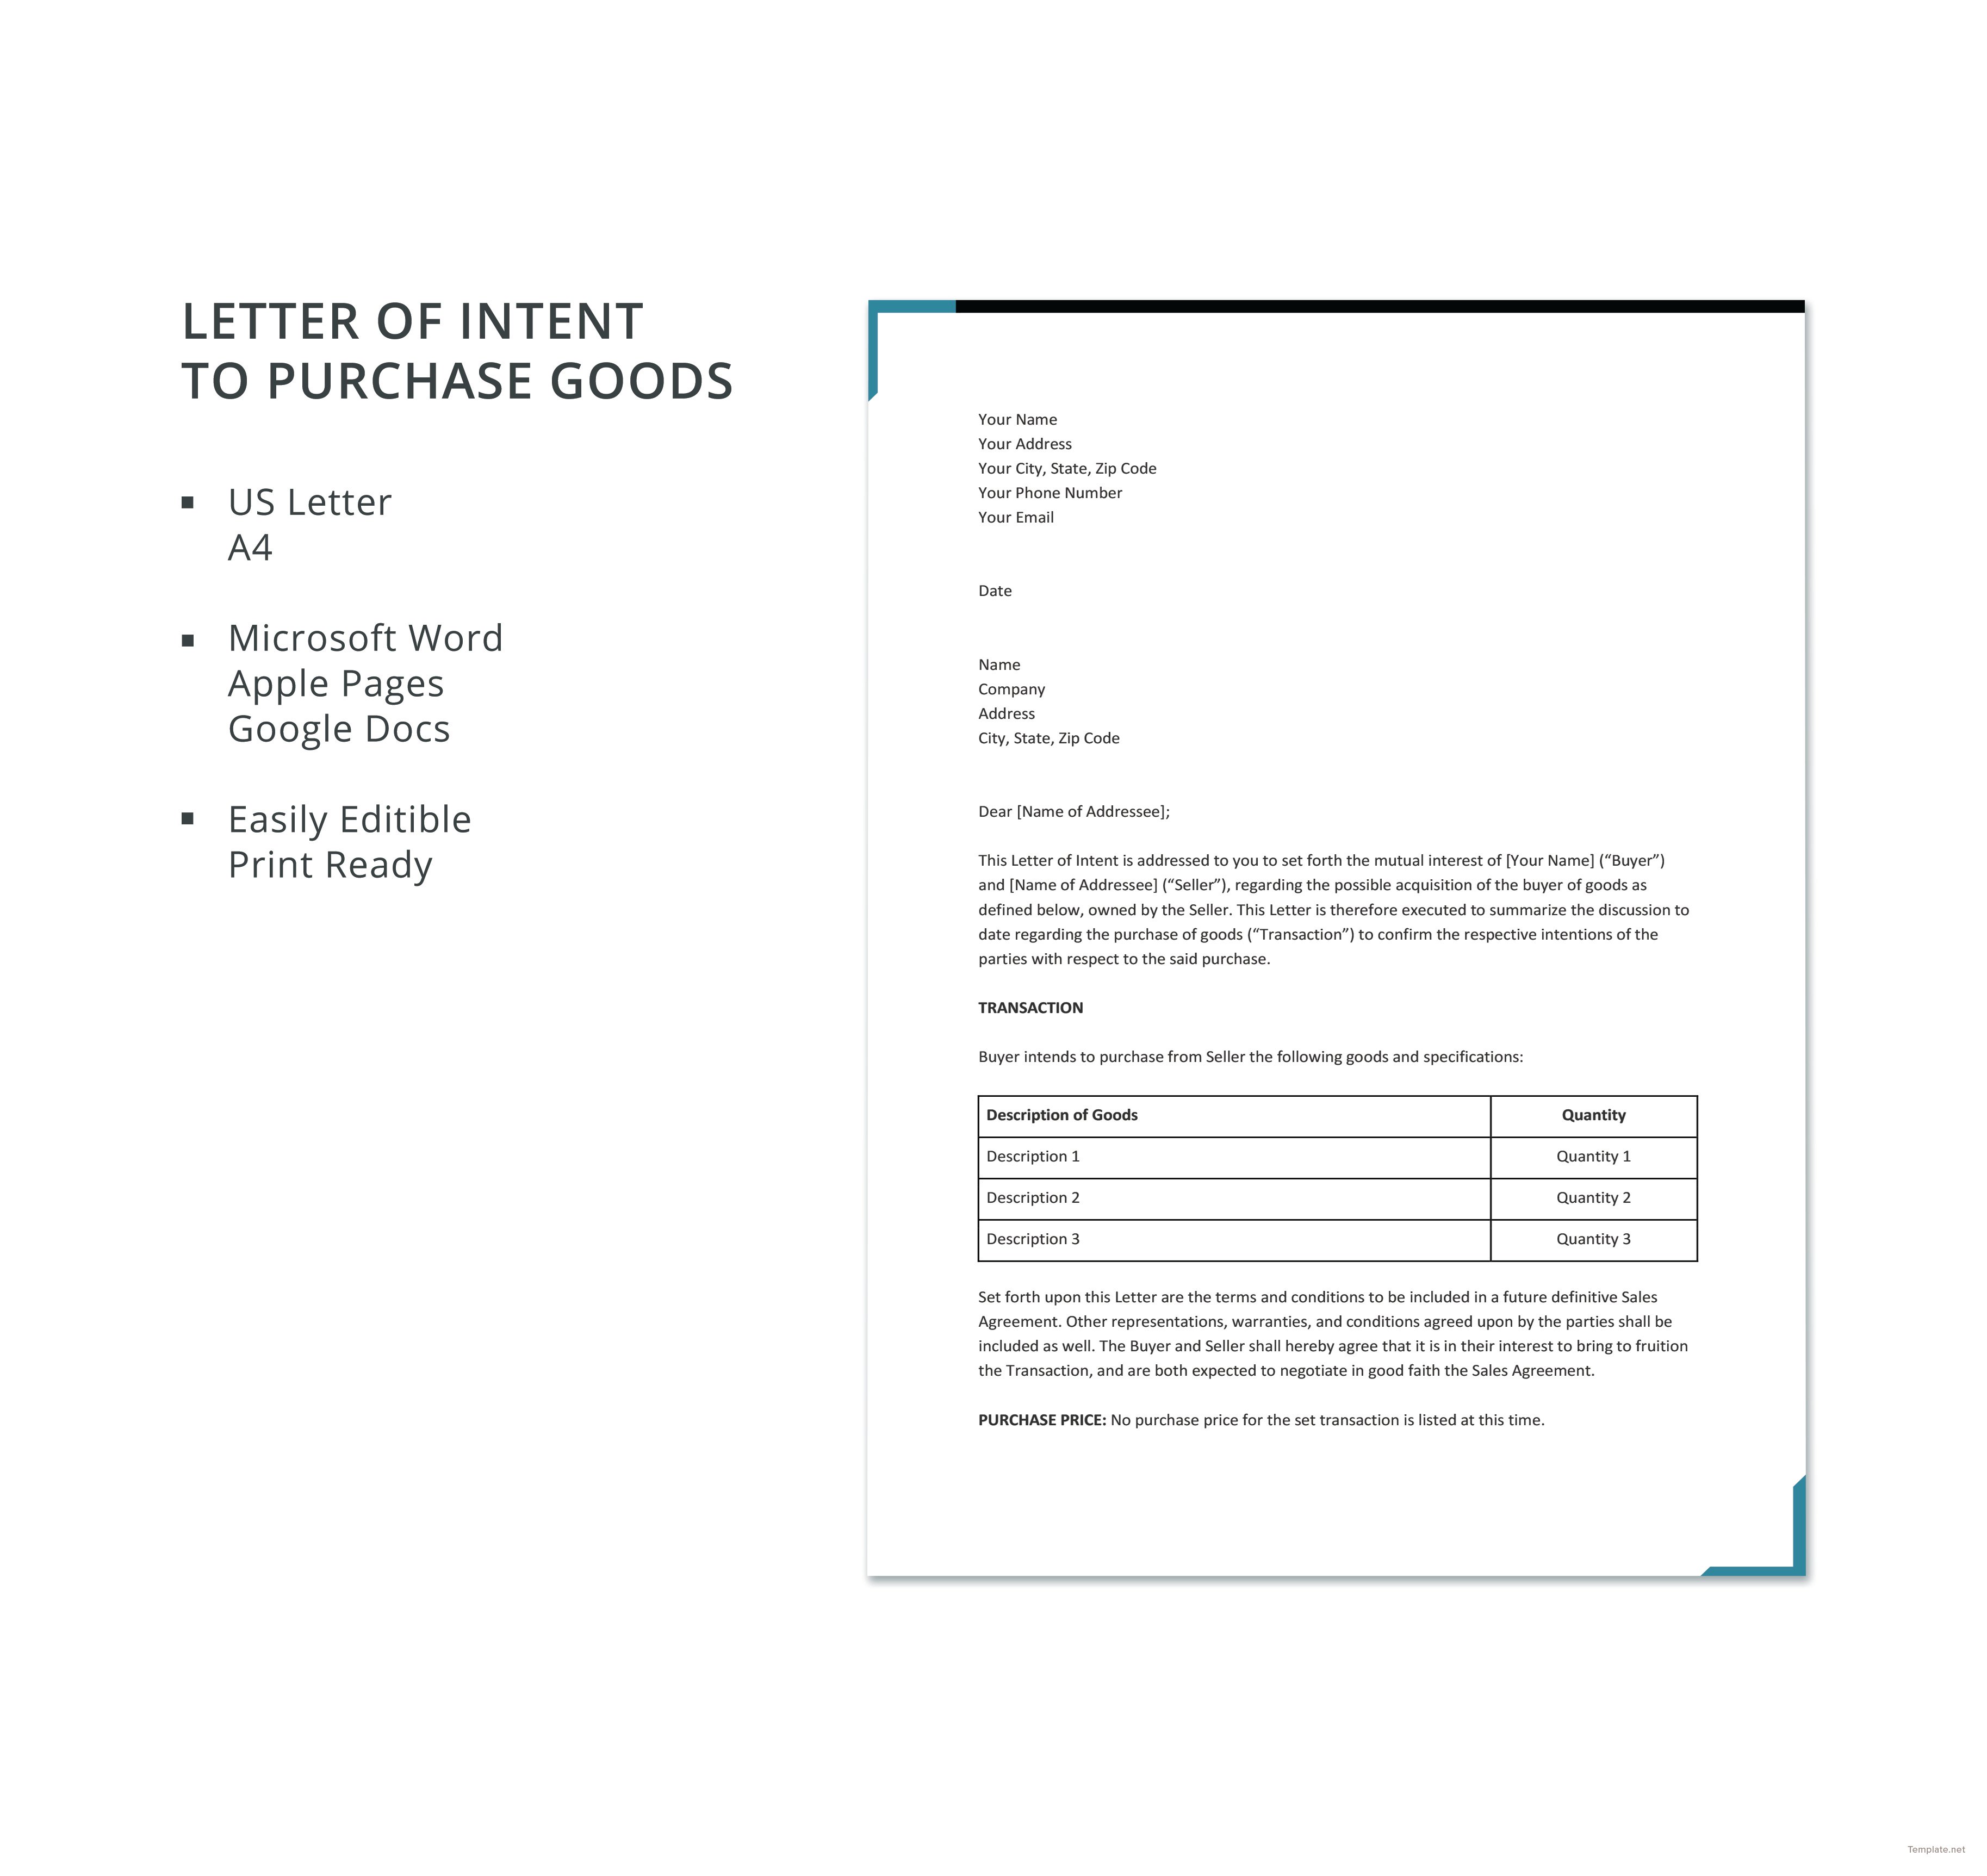 Letter of Intent to Purchase Goods Template in Microsoft ...